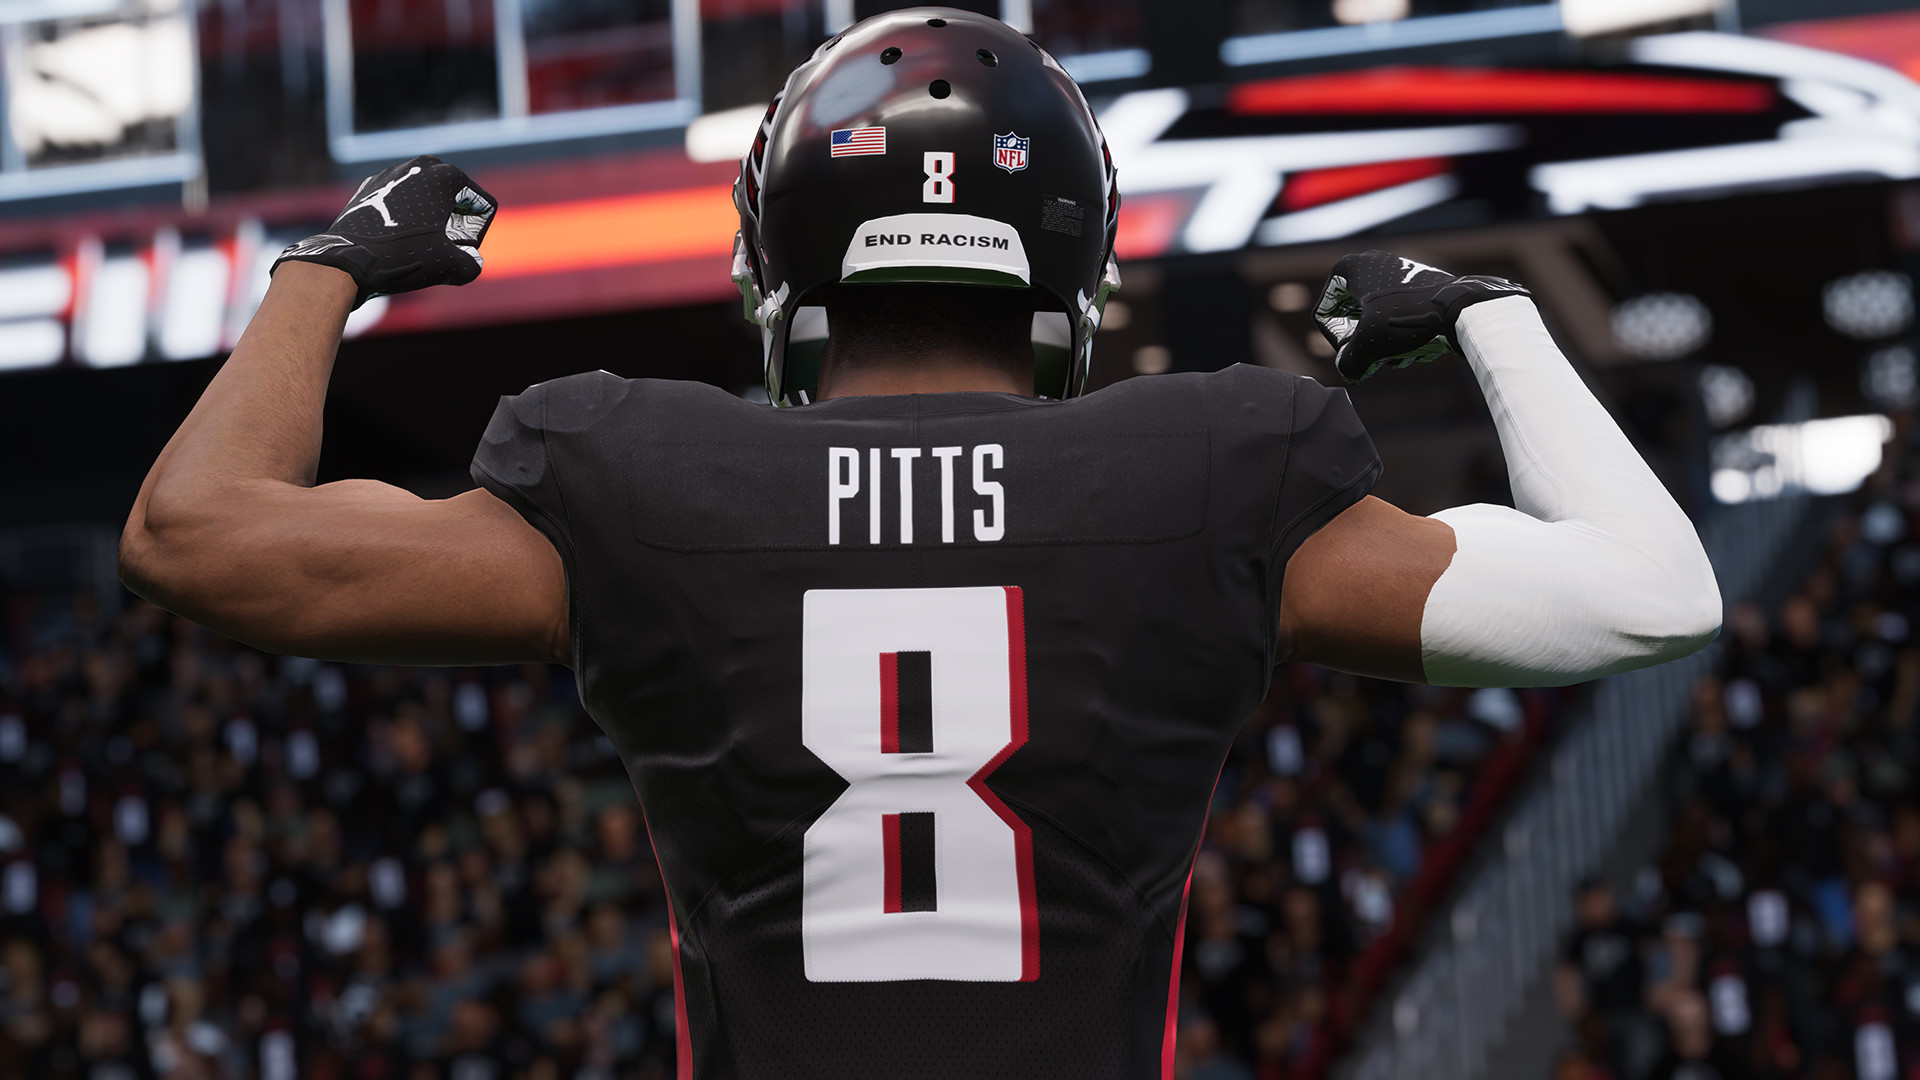 Madden NFL 22 PlayStation 5 Account Pixelpuffin.net Activation Link